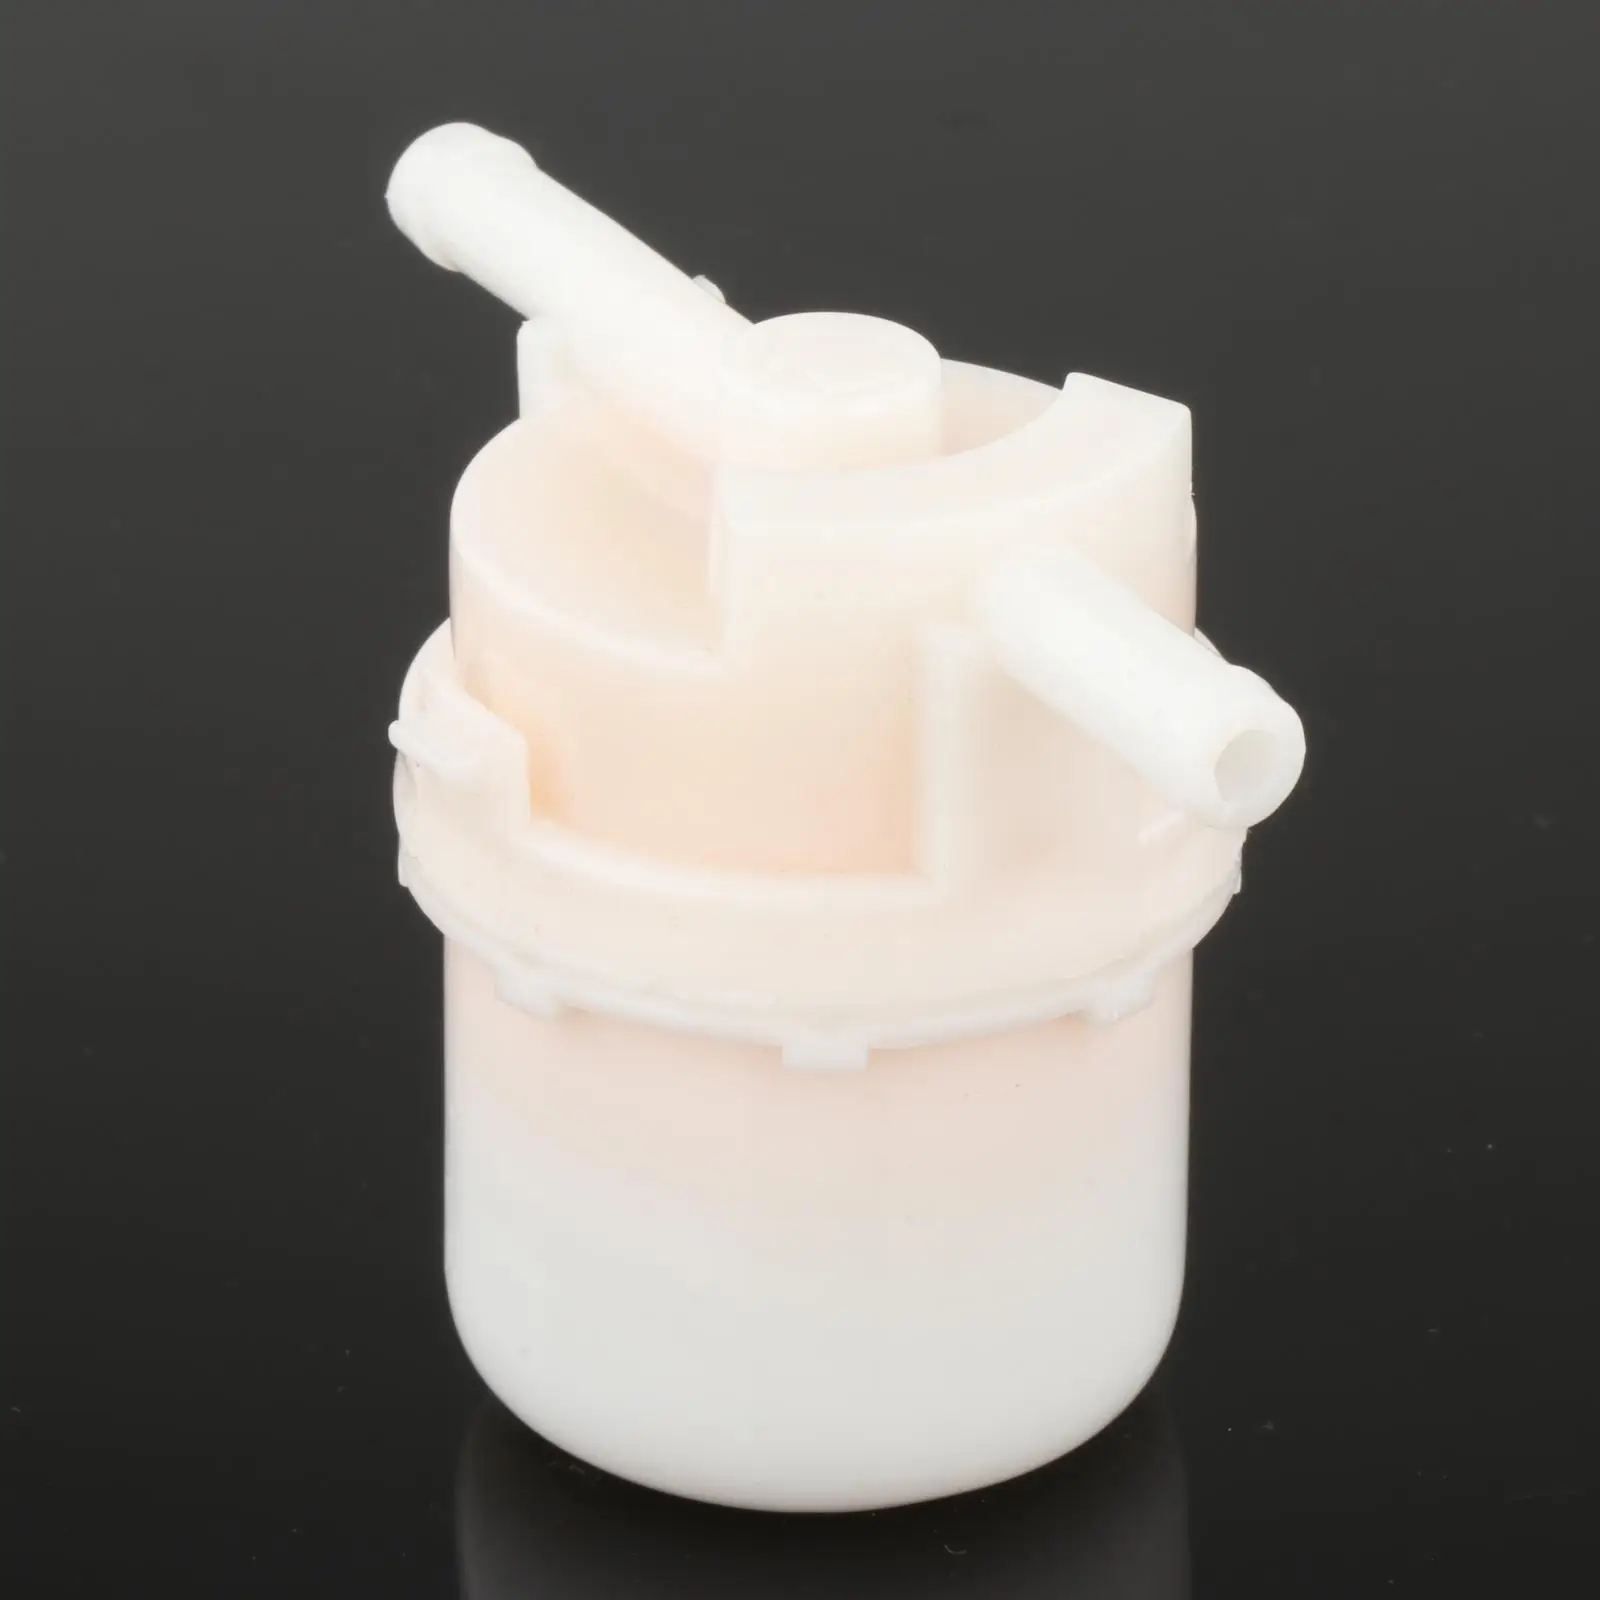 Fuel Filter 16900-Sa5-004 Direct Replaces Fits for Outboard Parts Spare Parts